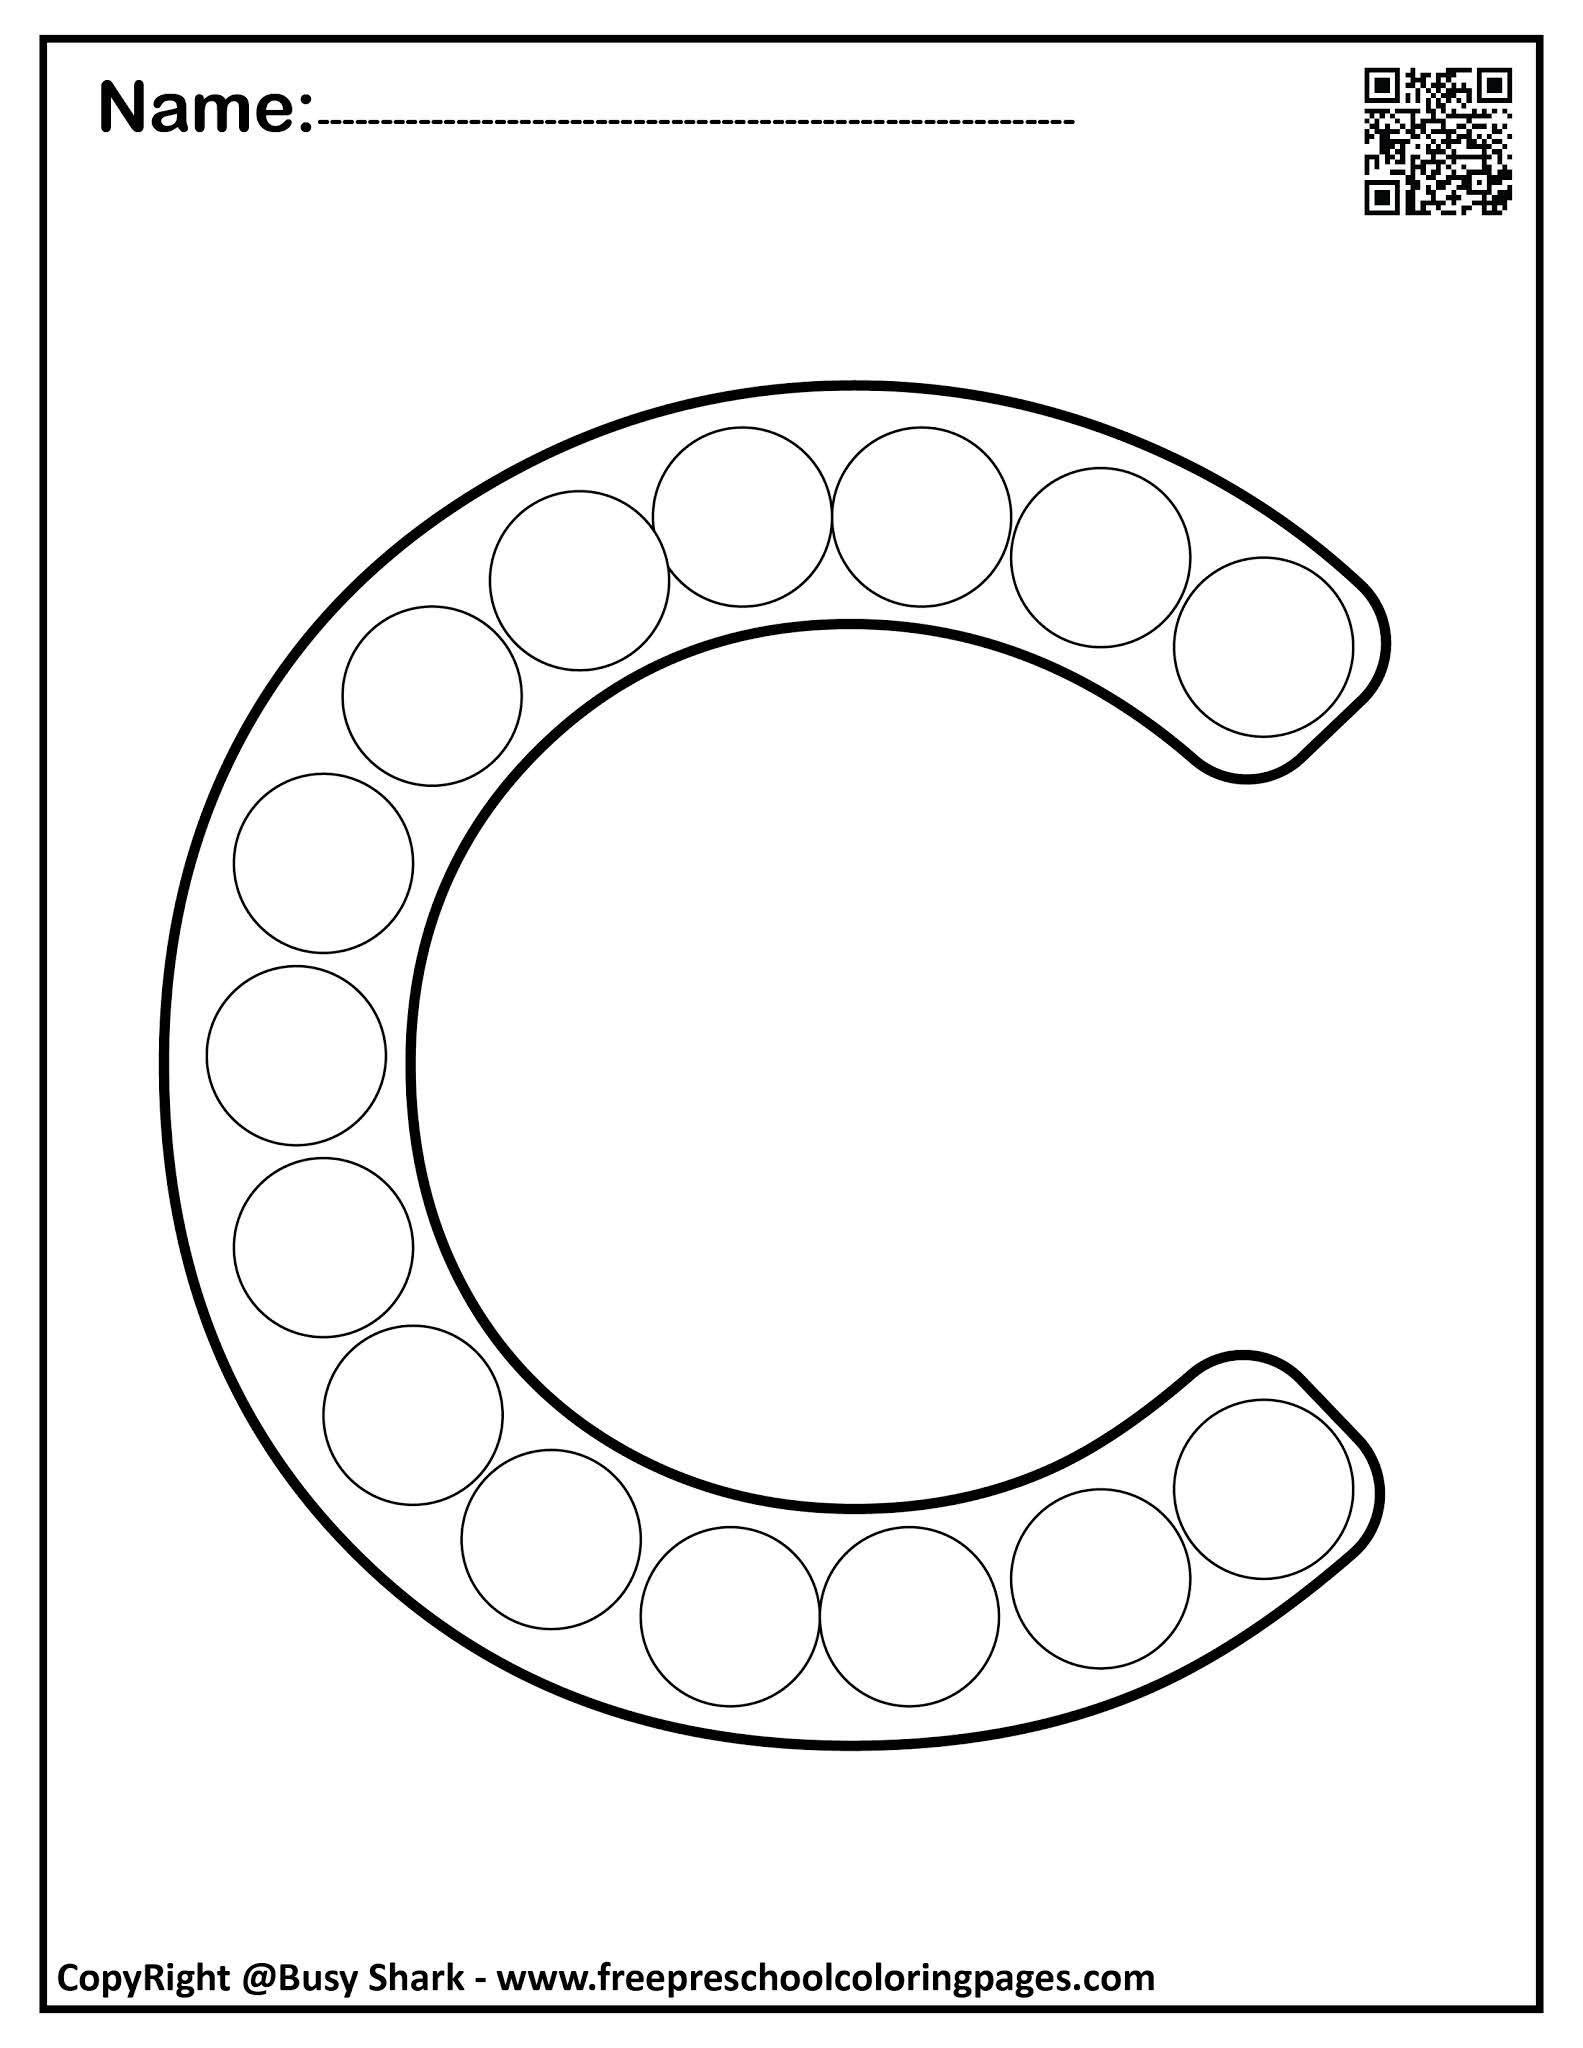 set-of-letter-c-10-free-dot-markers-coloring-pages